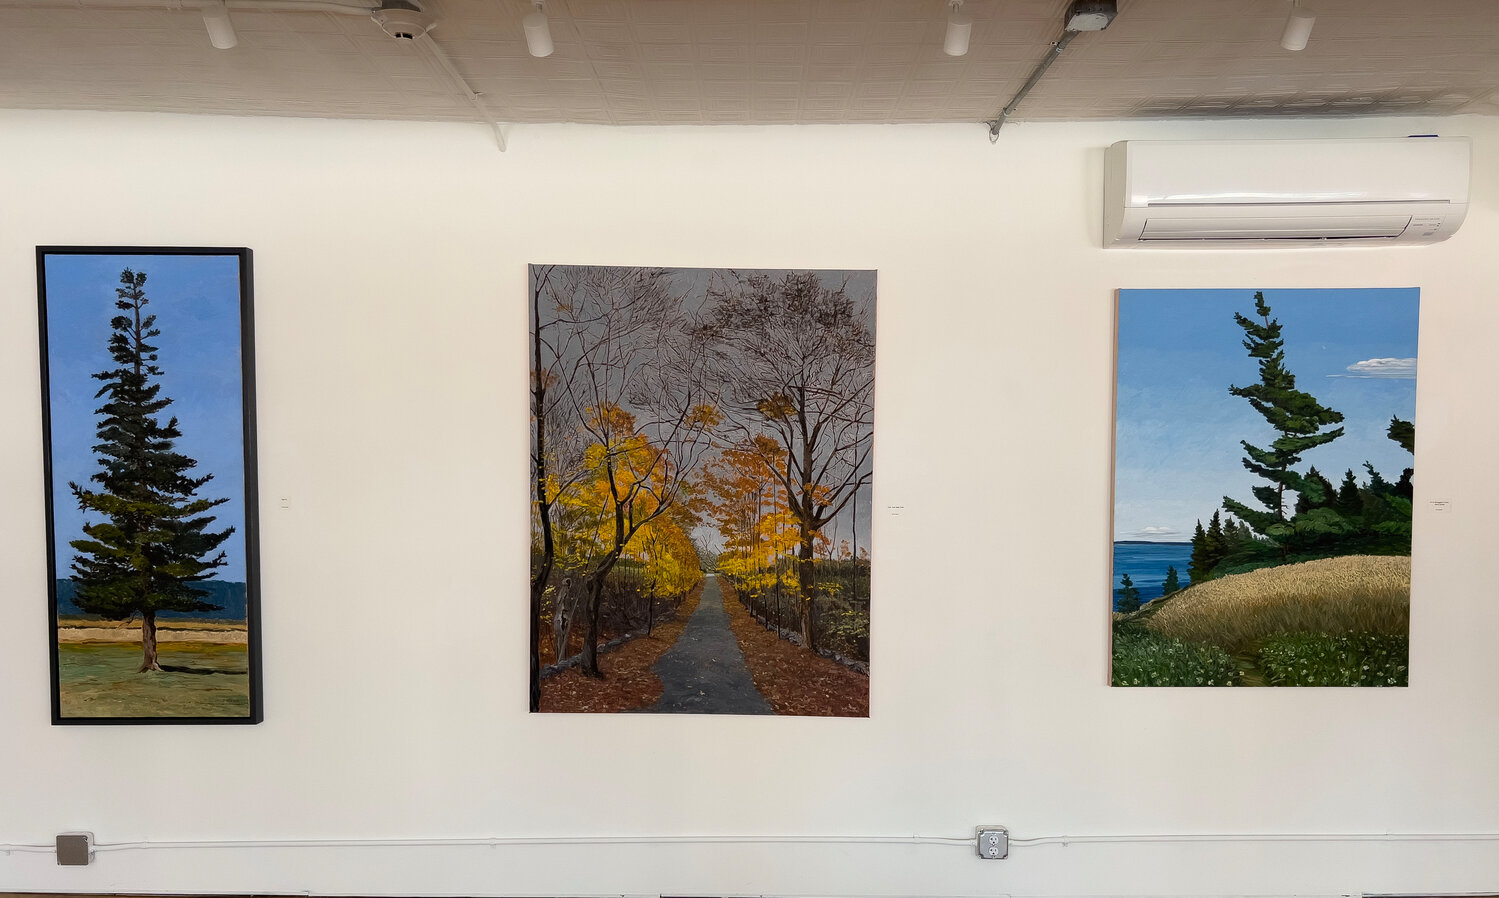 The exhibit, titled “Forest”, features beautiful depictions of various natural scenes anchored by trees and greenery. They were painted by Peter Devine.